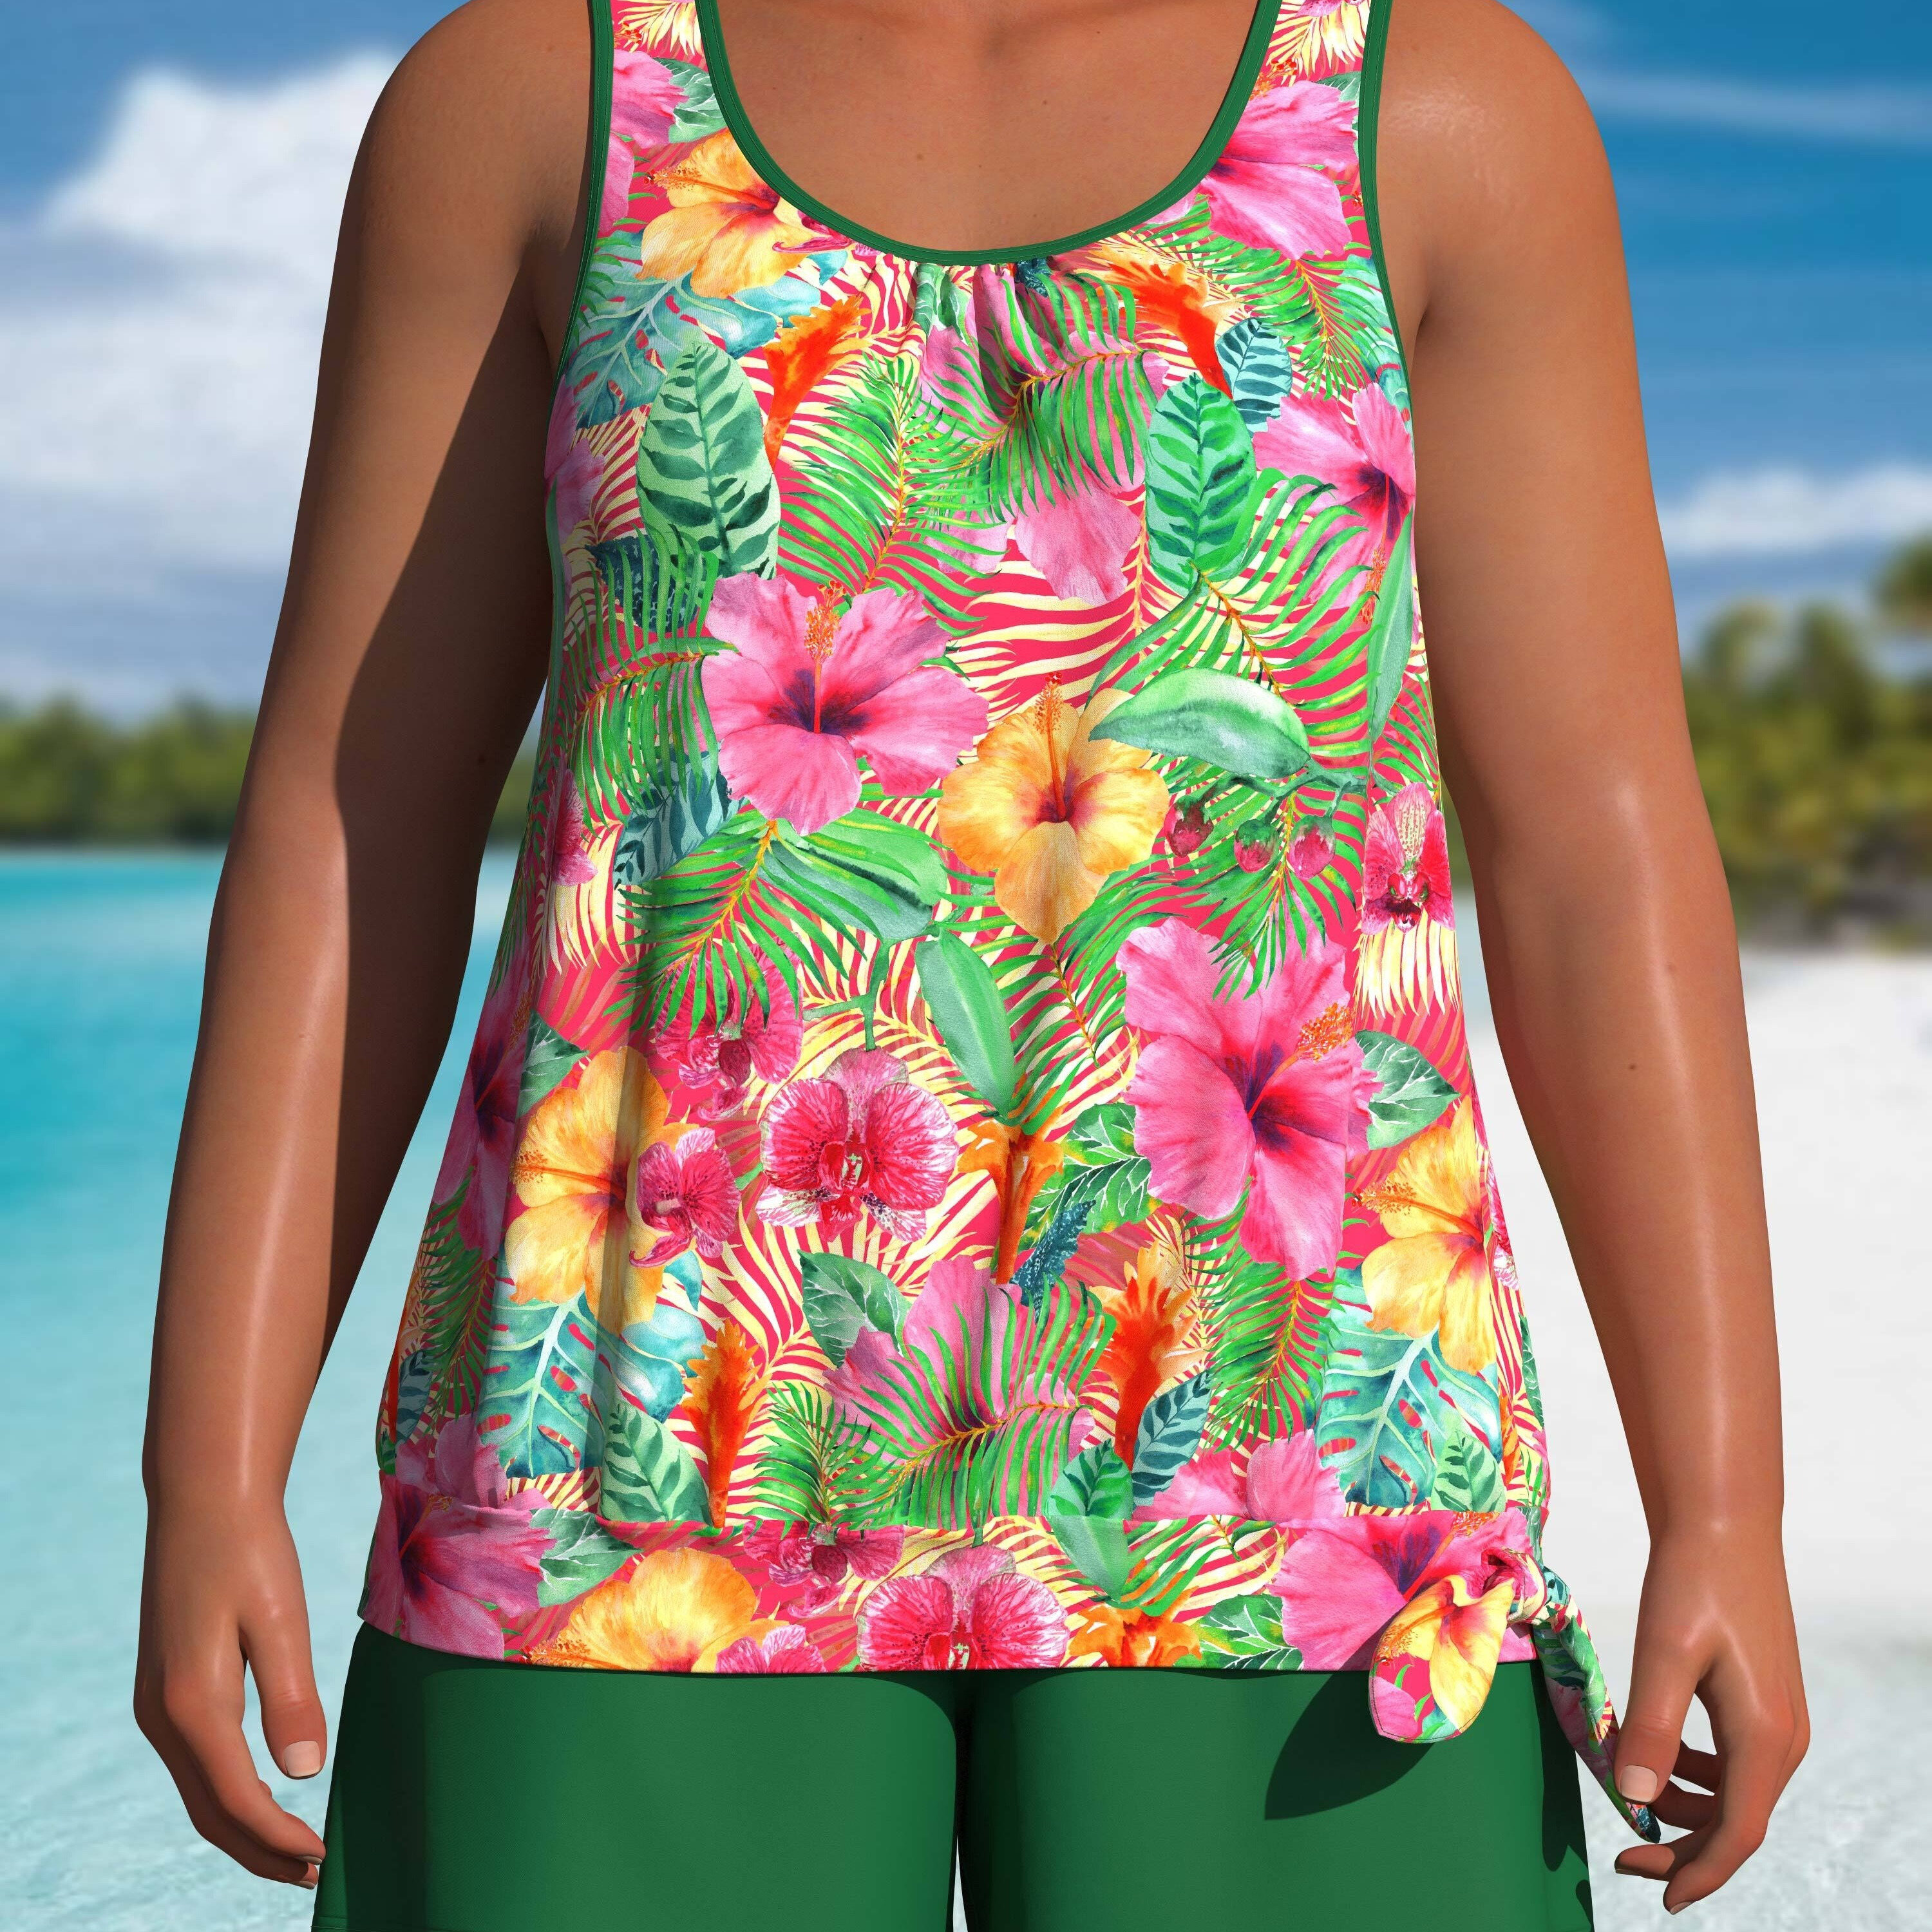 

Women's Plus Size Floral Round Neck Tankini Swimsuit Set, Conservative Style, Vibrant Tropical Print, Two-piece Bathing Suit With Boyshorts